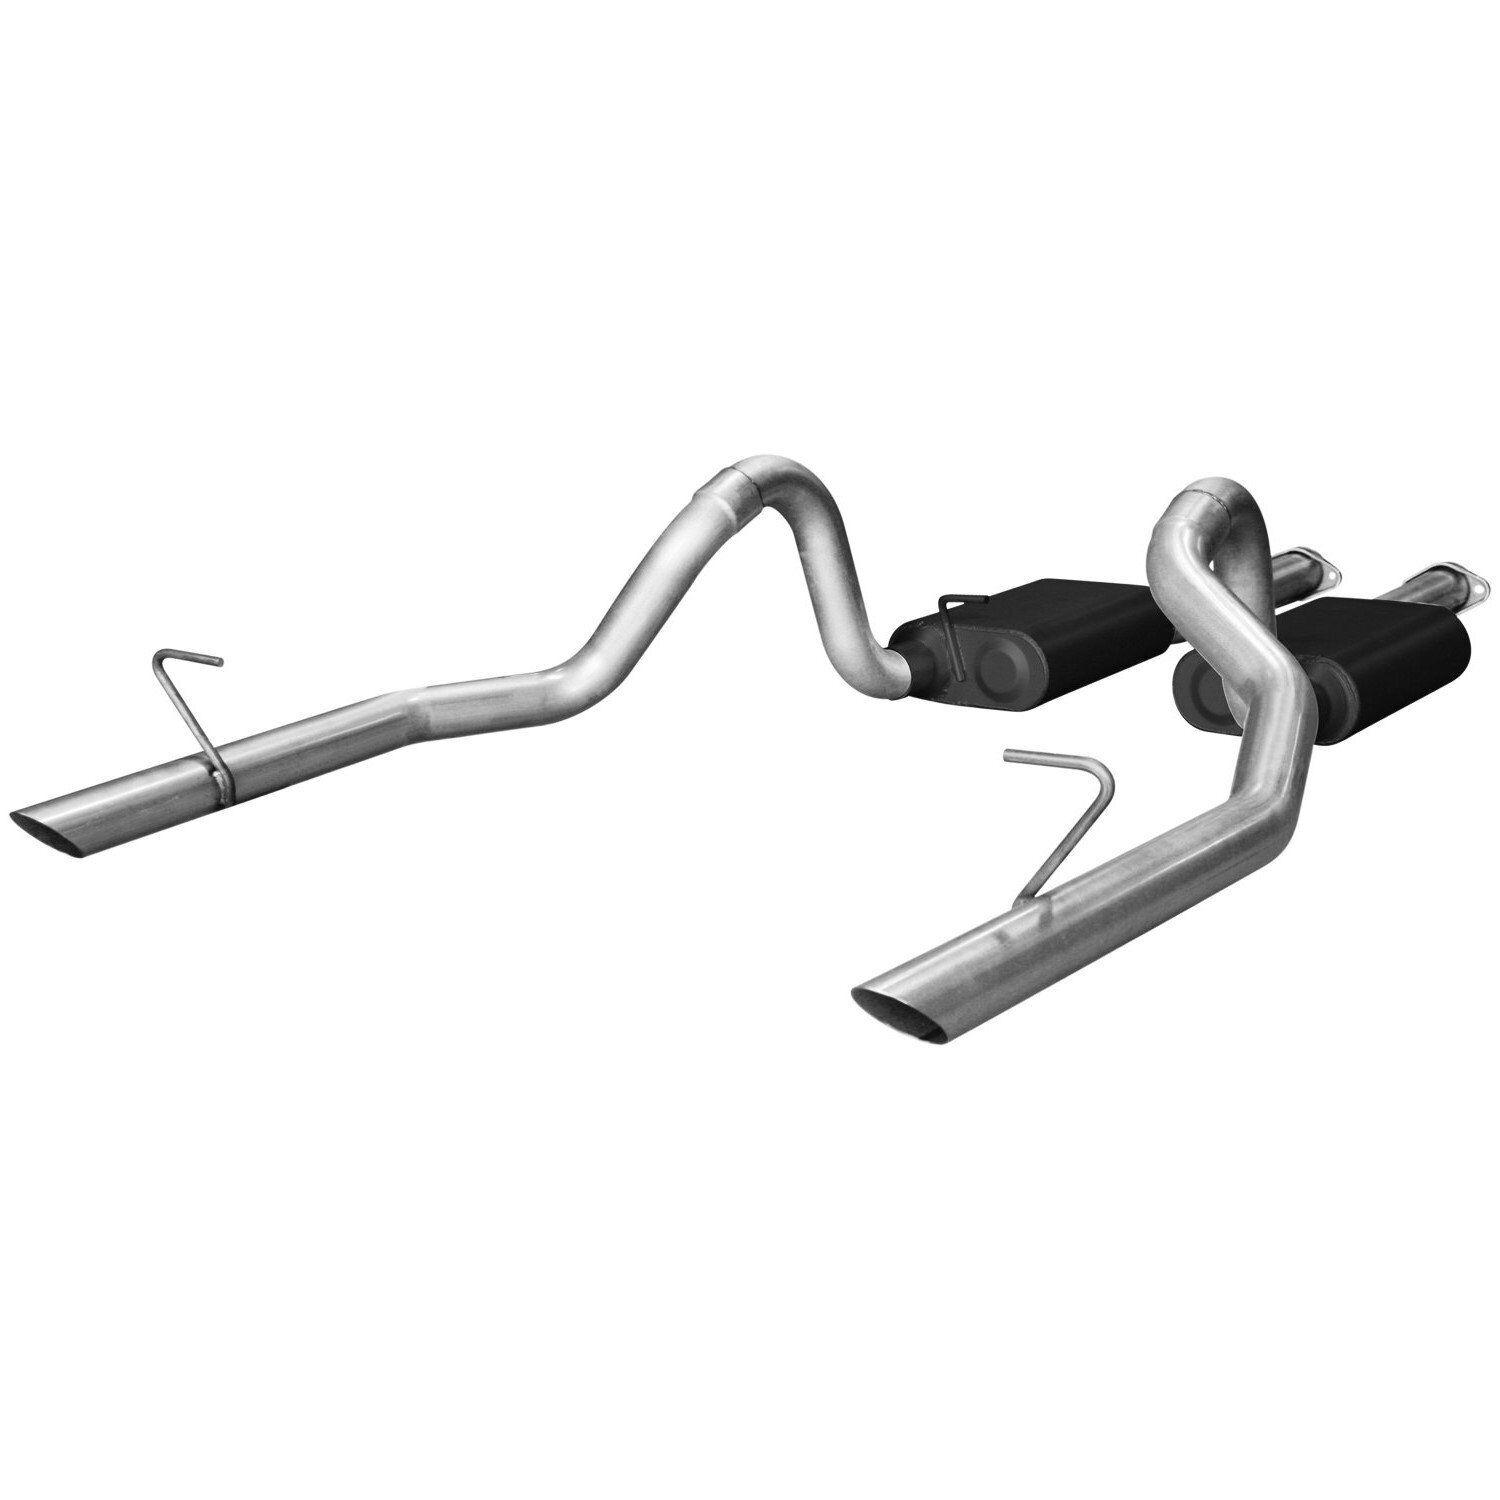 Flowmaster 17113 American Thunder Cat-back Exhaust System